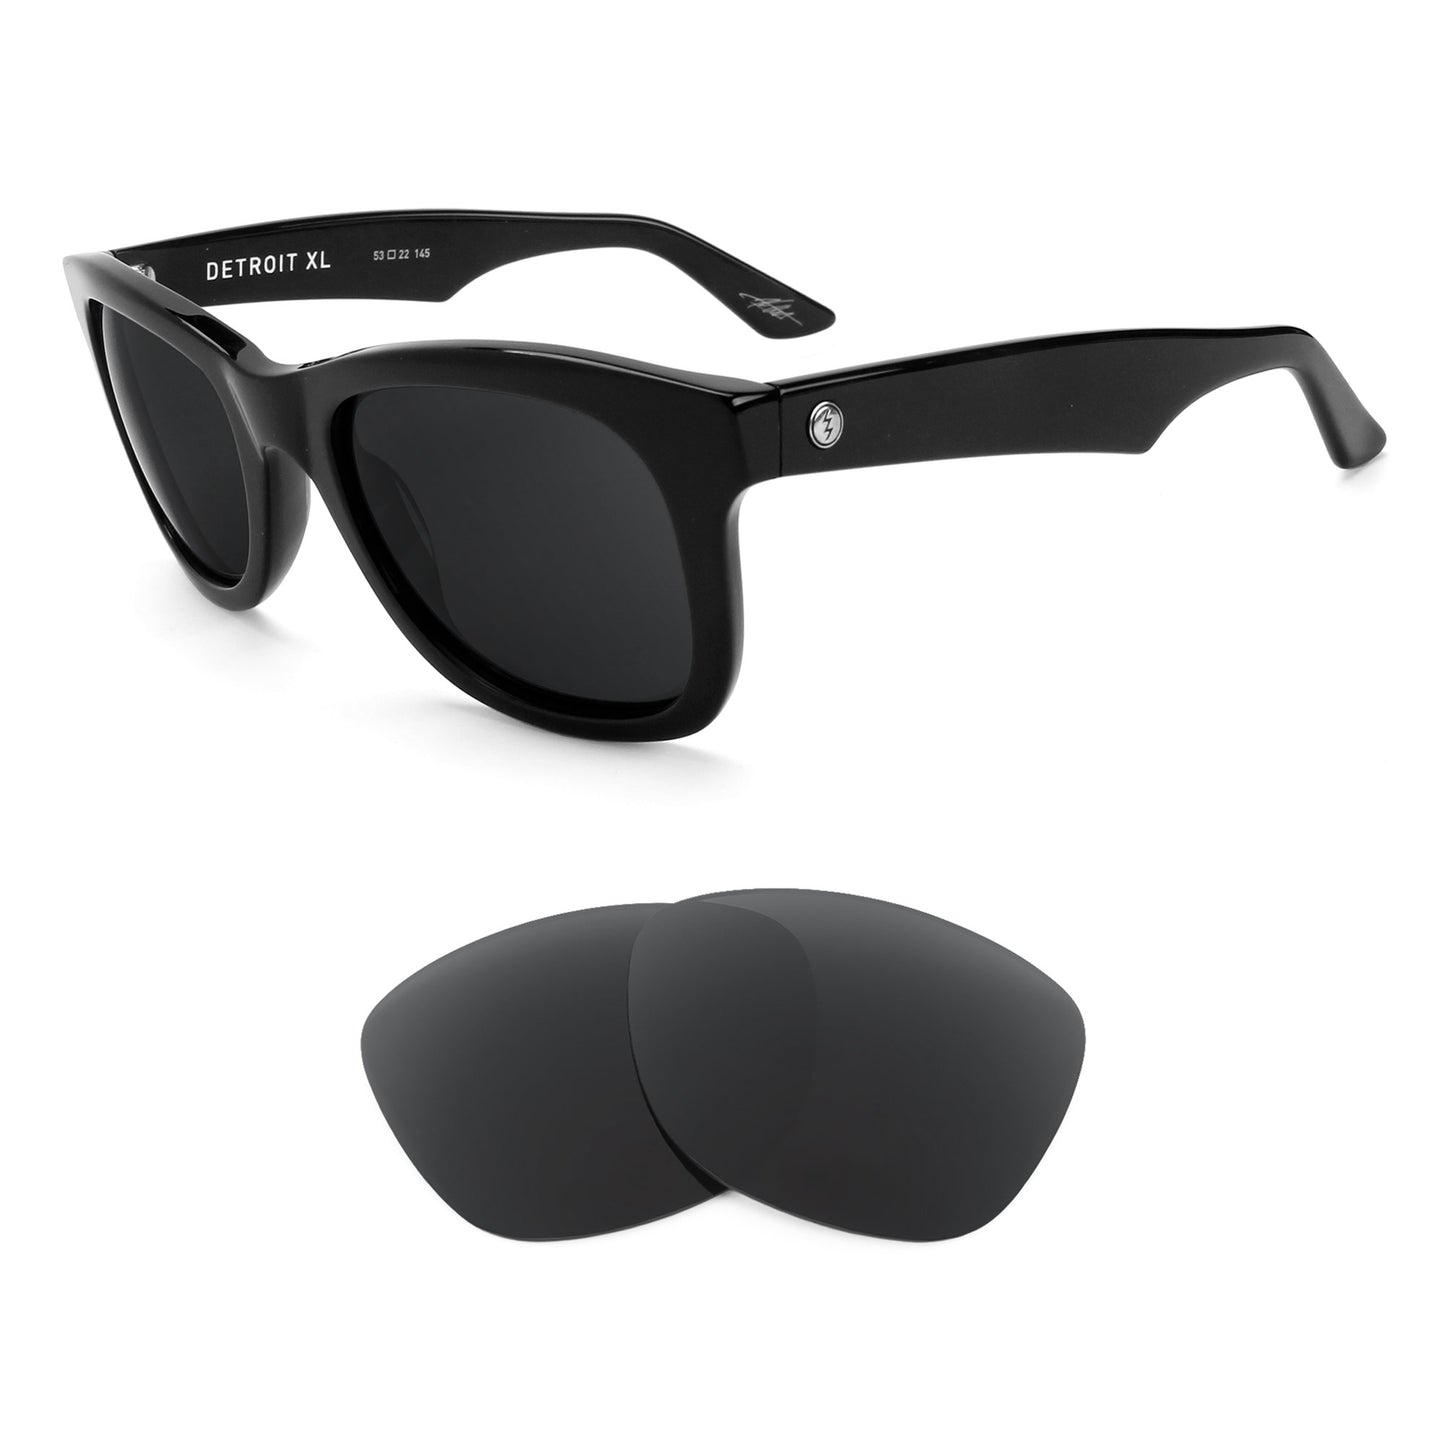 Electric Detroit XL sunglasses with replacement lenses